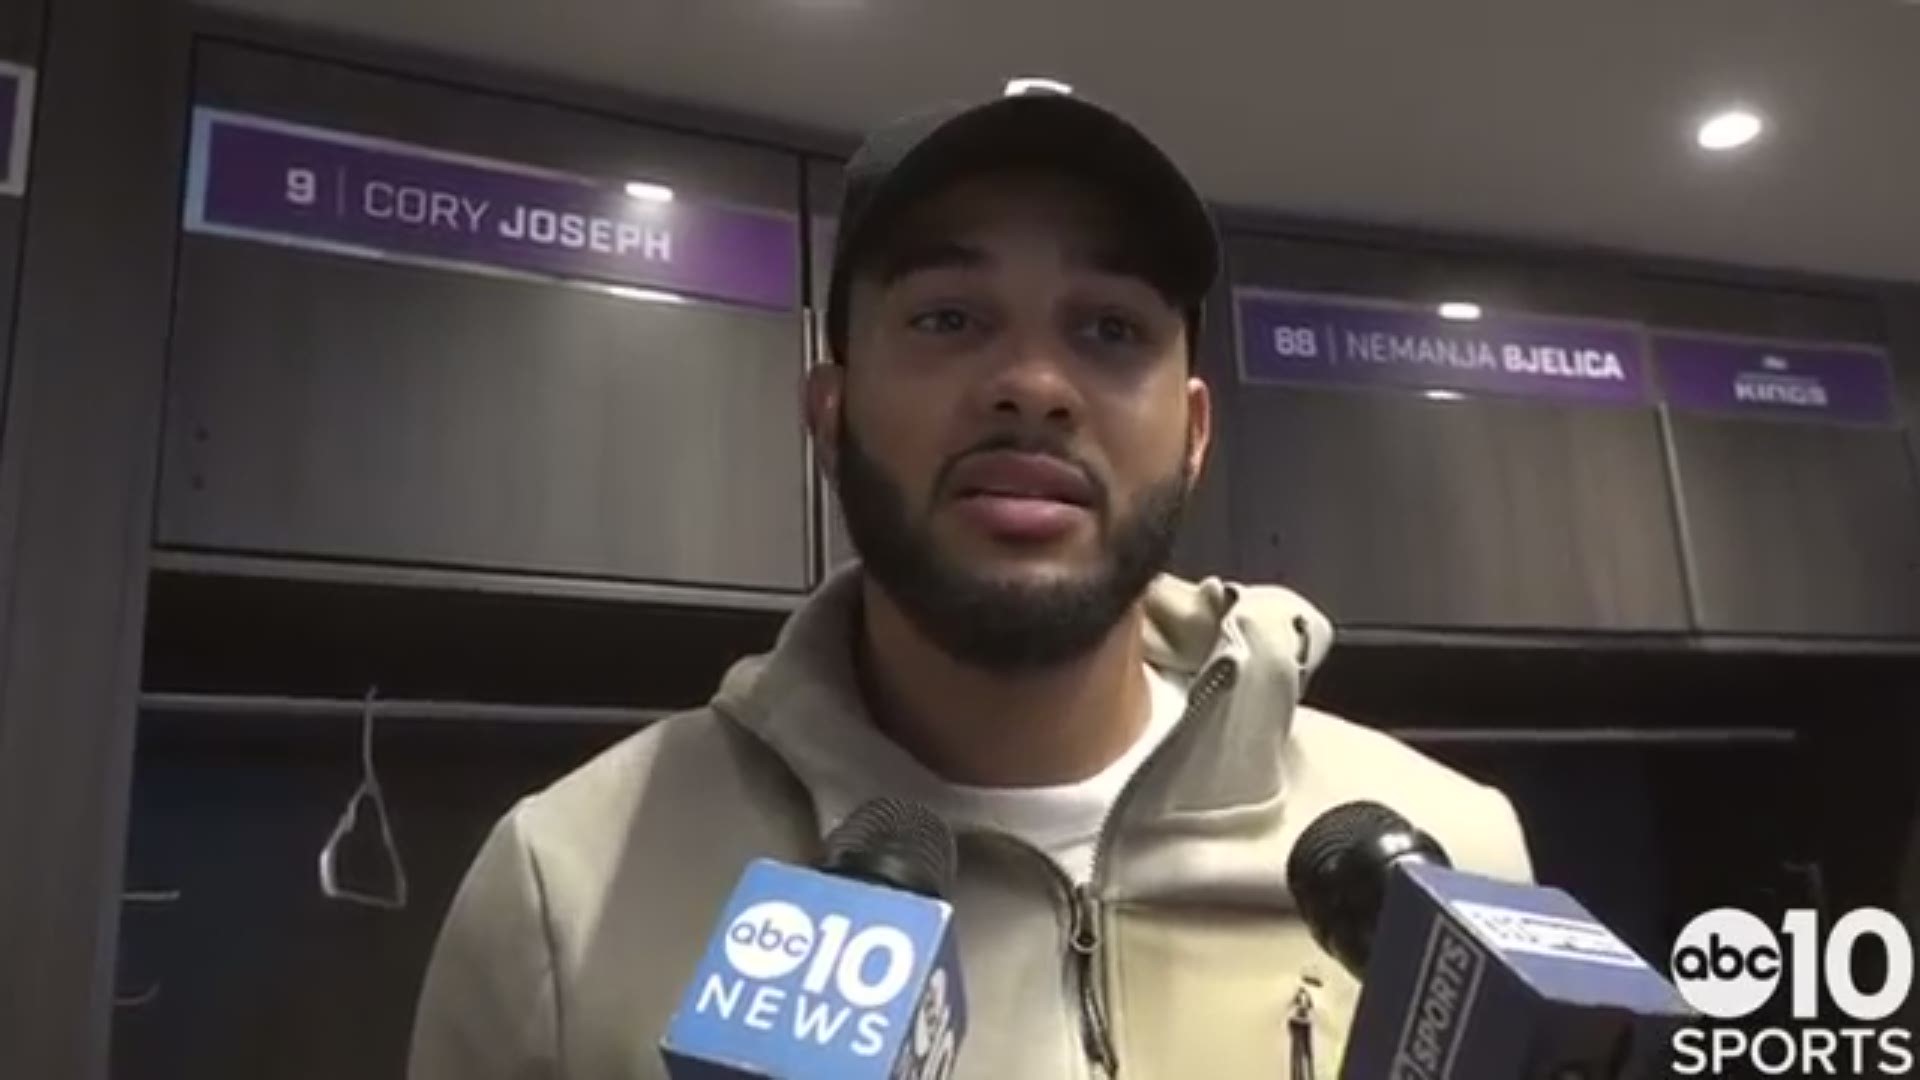 Cory Joseph talks to the media following Tuesday's Kings win over the Portland Trail Blazers about the defensive effort, facing Damian Lillard,  in the start.